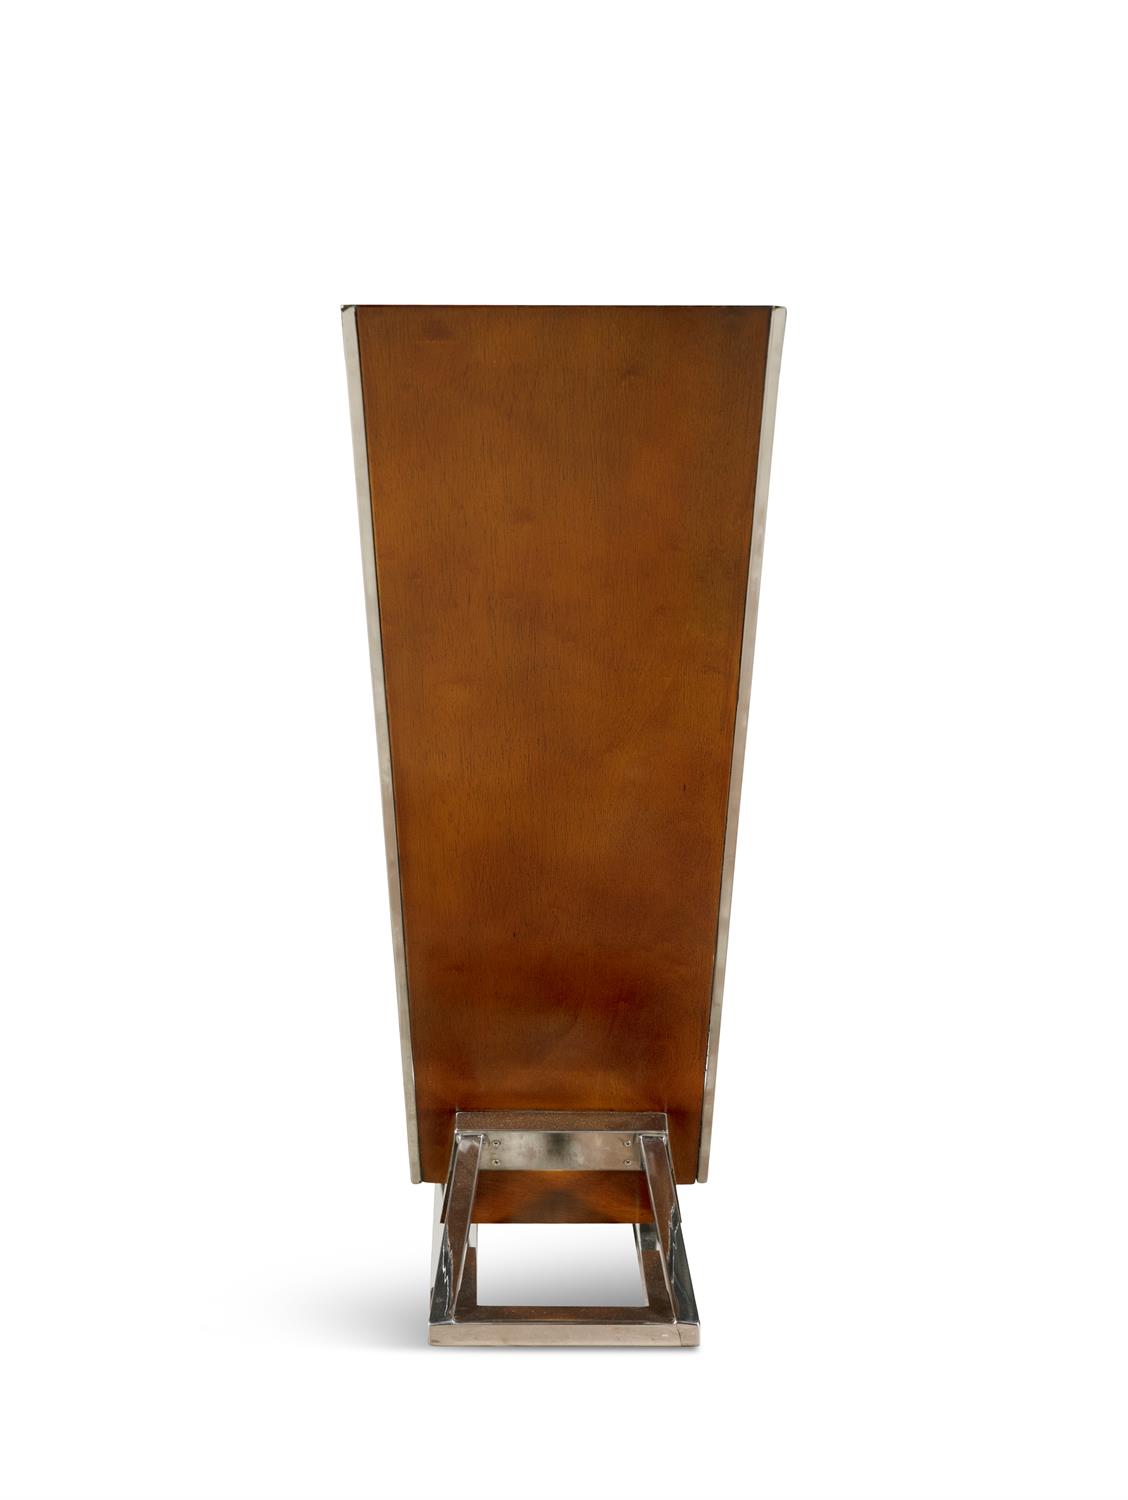 CONSOLE A triangular shaped console with a single drawer. Chrome and teak. France. - Image 6 of 7